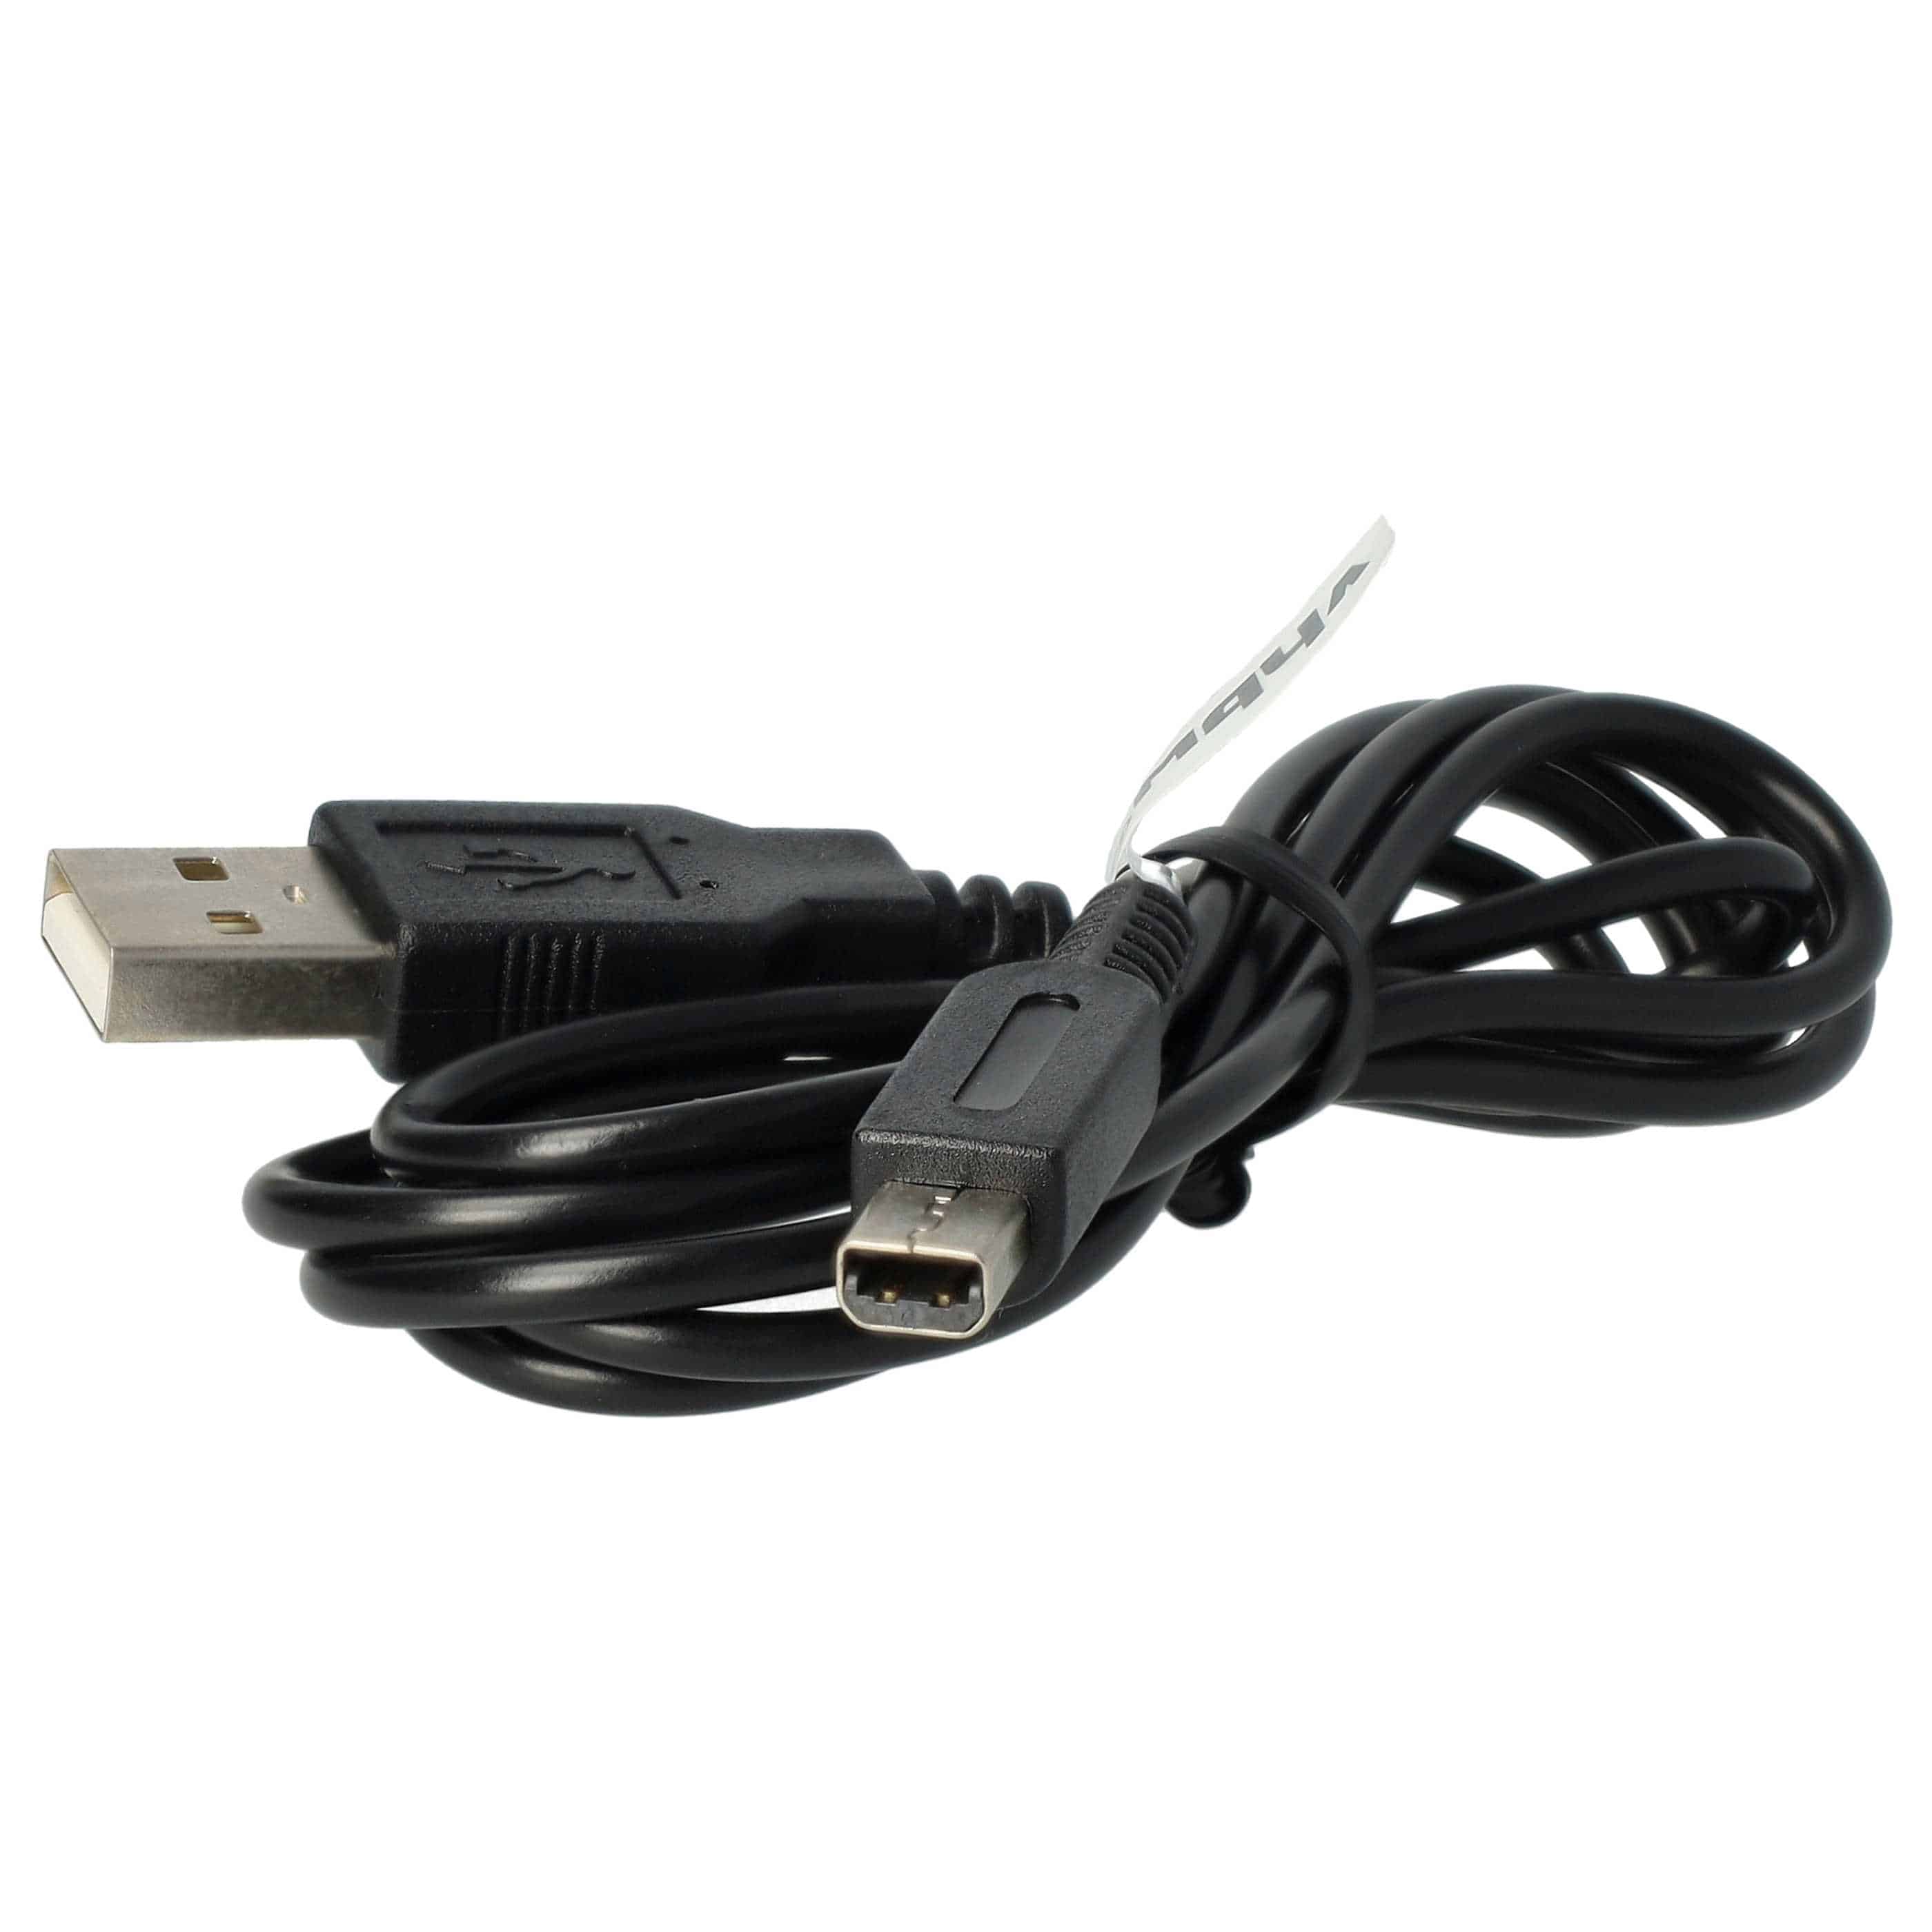 vhbw USB Cable Games Console - Connection Cable 1.2m Long